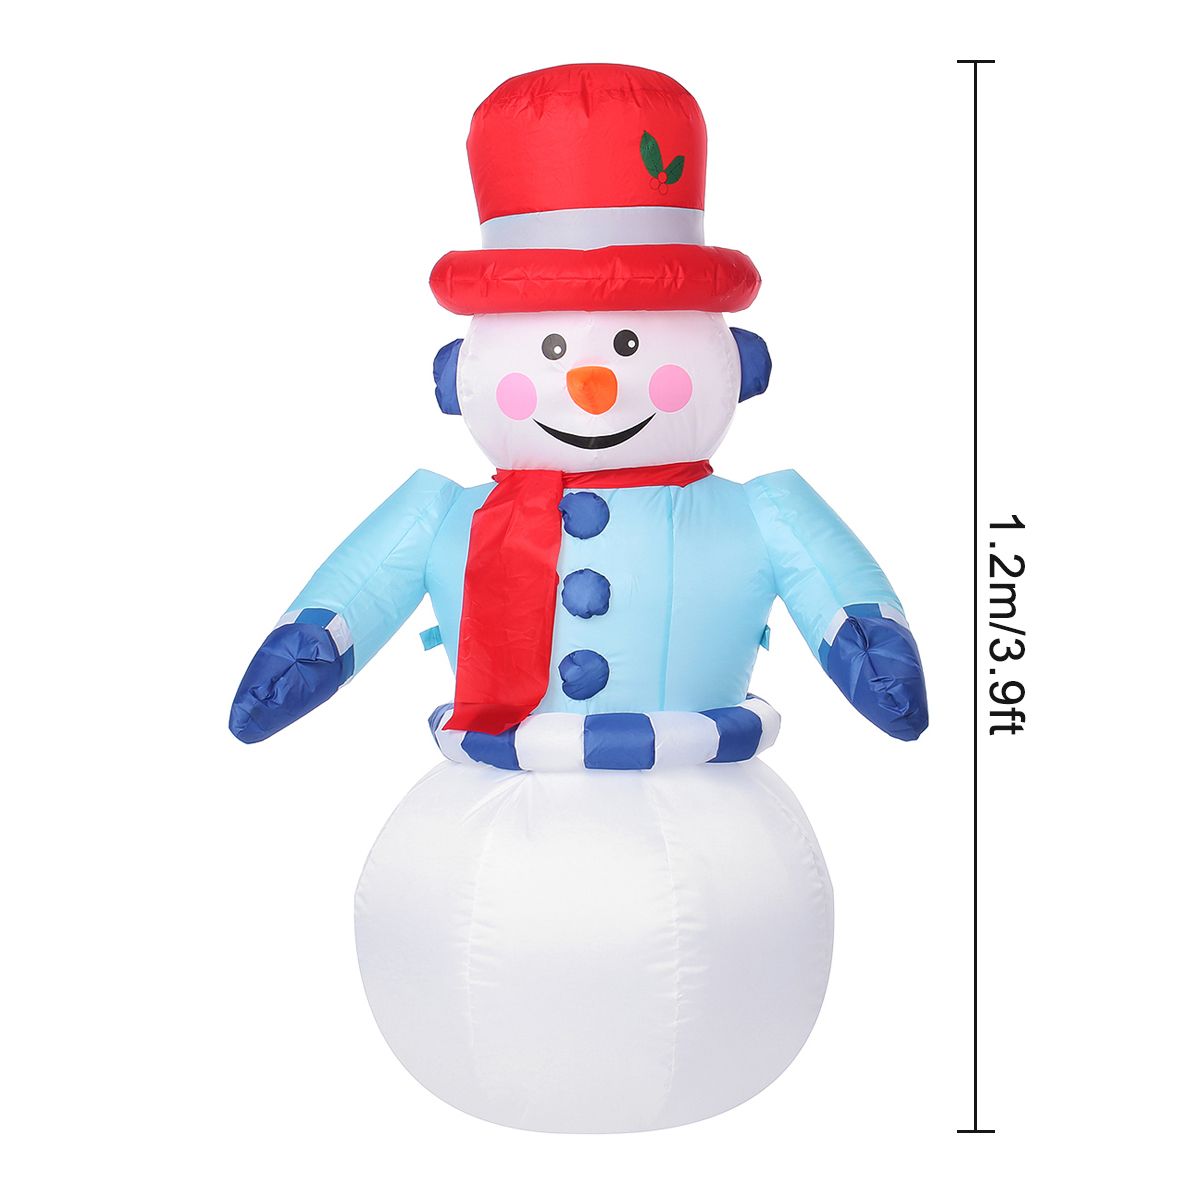 12m-LED-Christmas-Inflatable-Snowman-Halloween-Outdoors-Ornaments-Shop-Decoration-1768269